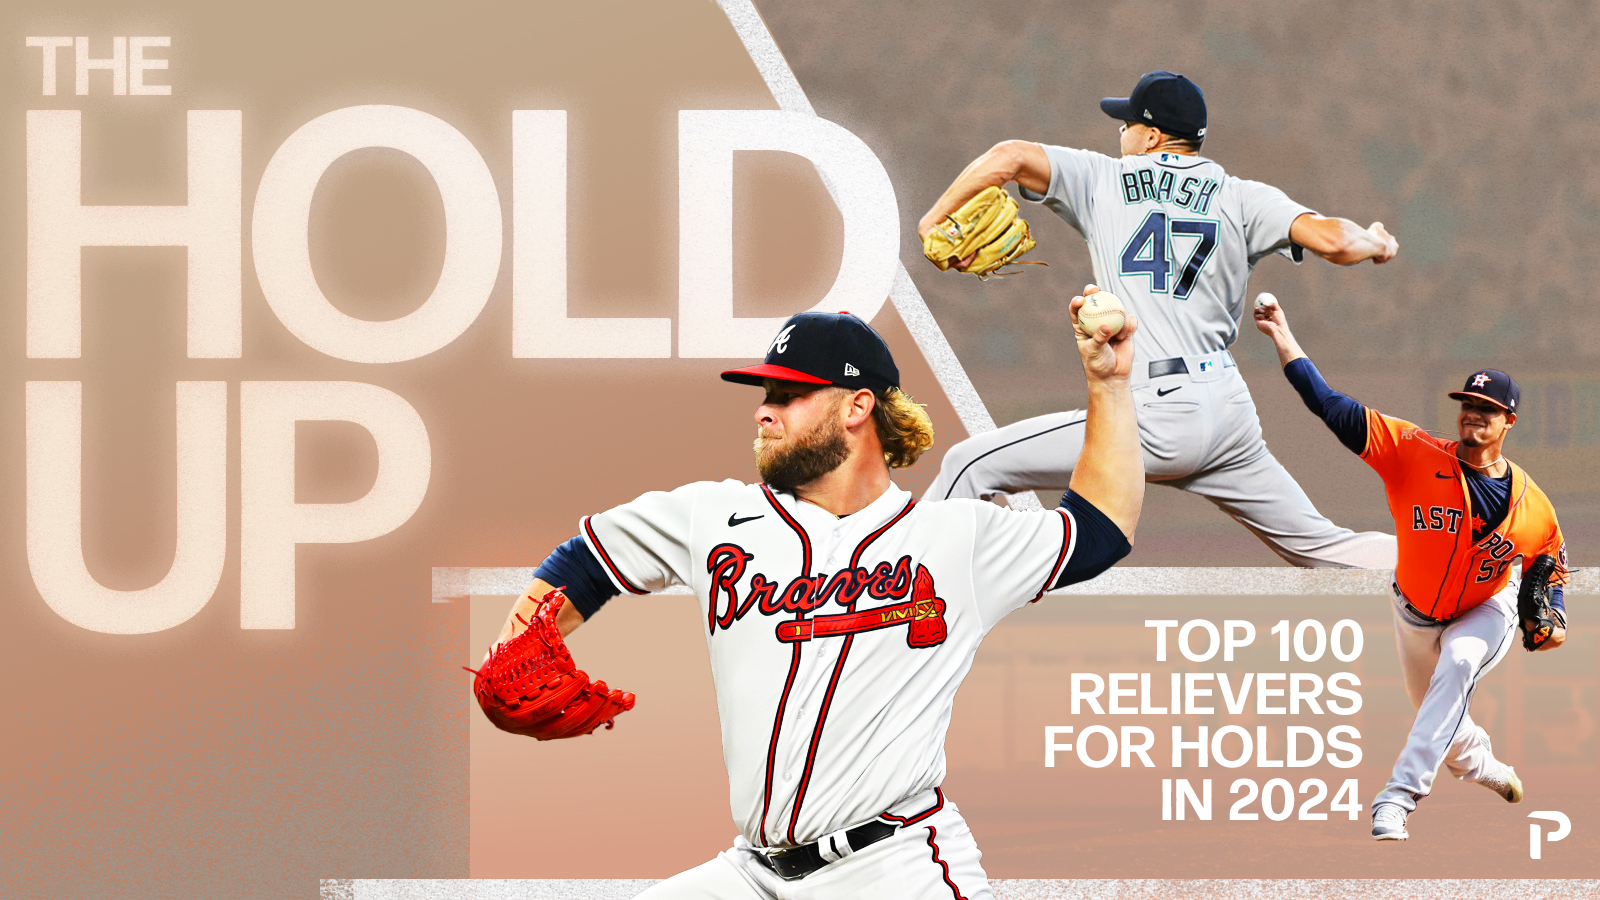 The Hold Up Top 100 Relievers for Holds in 2024 Pitcher List